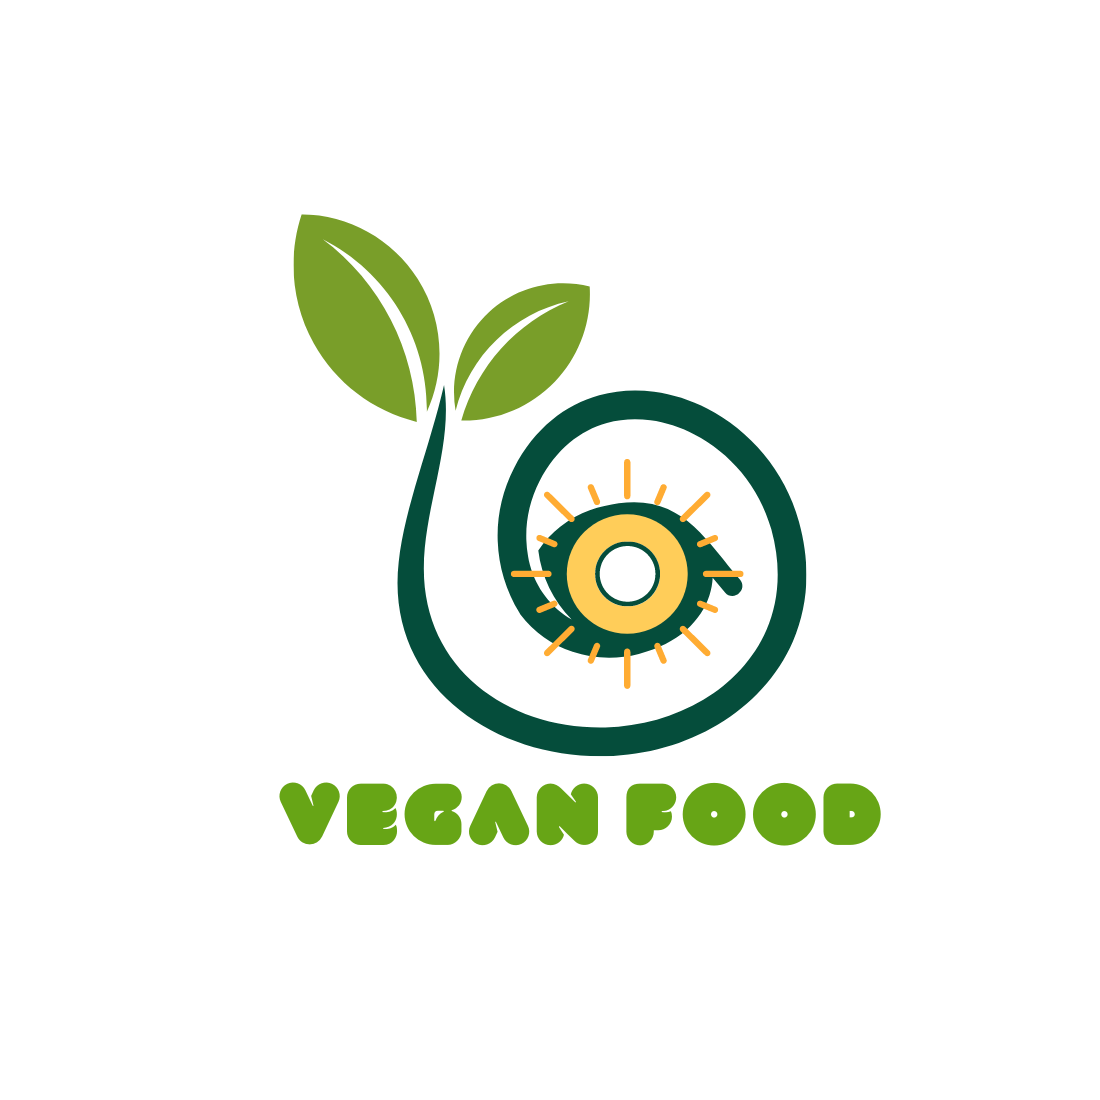 Vegan Food Logo for Any Company cover image.